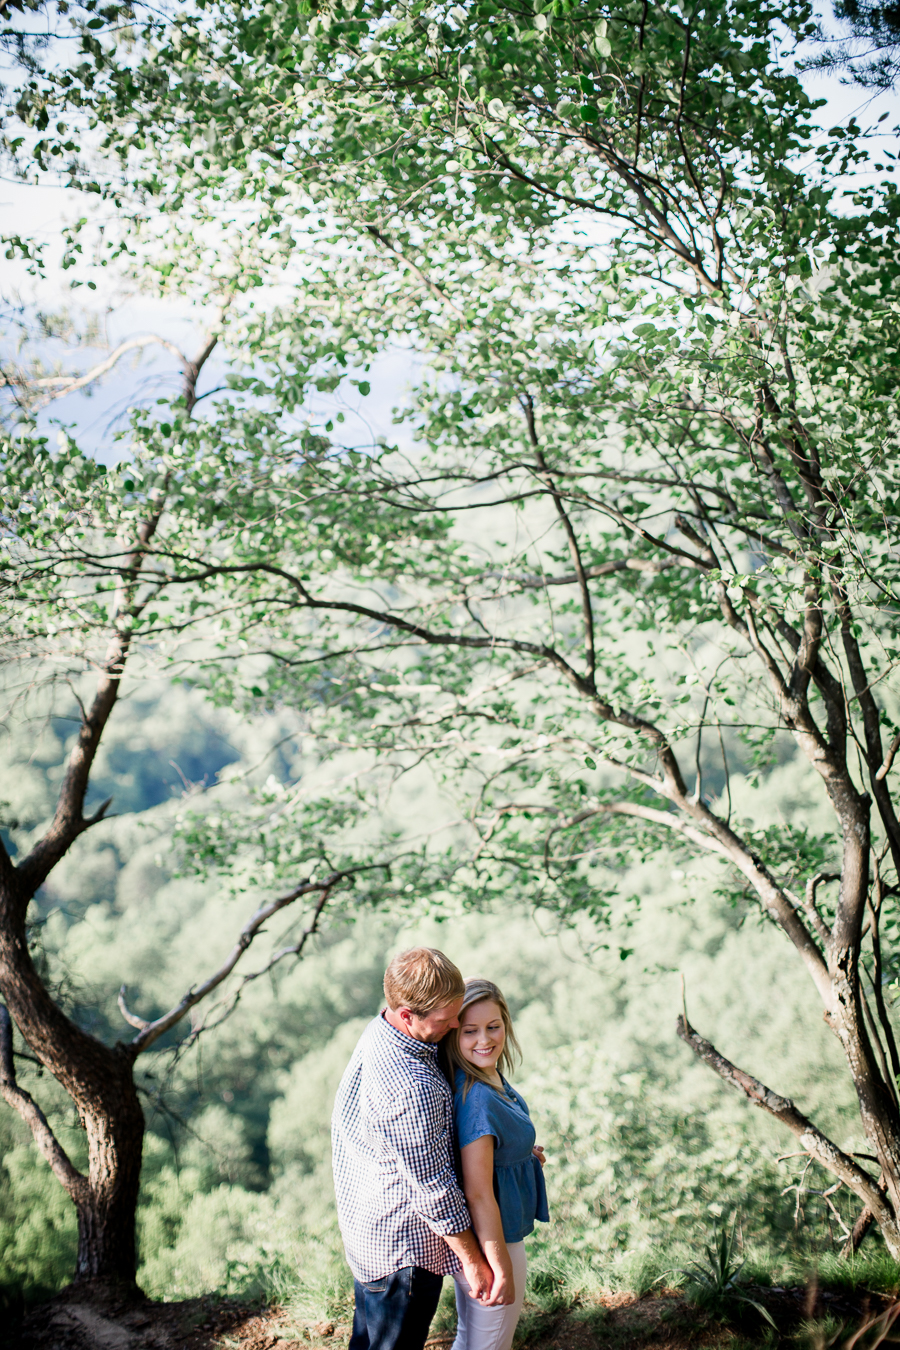 Holding hands from behind at Sunset Rock in Chattanooga by Knoxville Wedding Photographer Amanda May Photos.